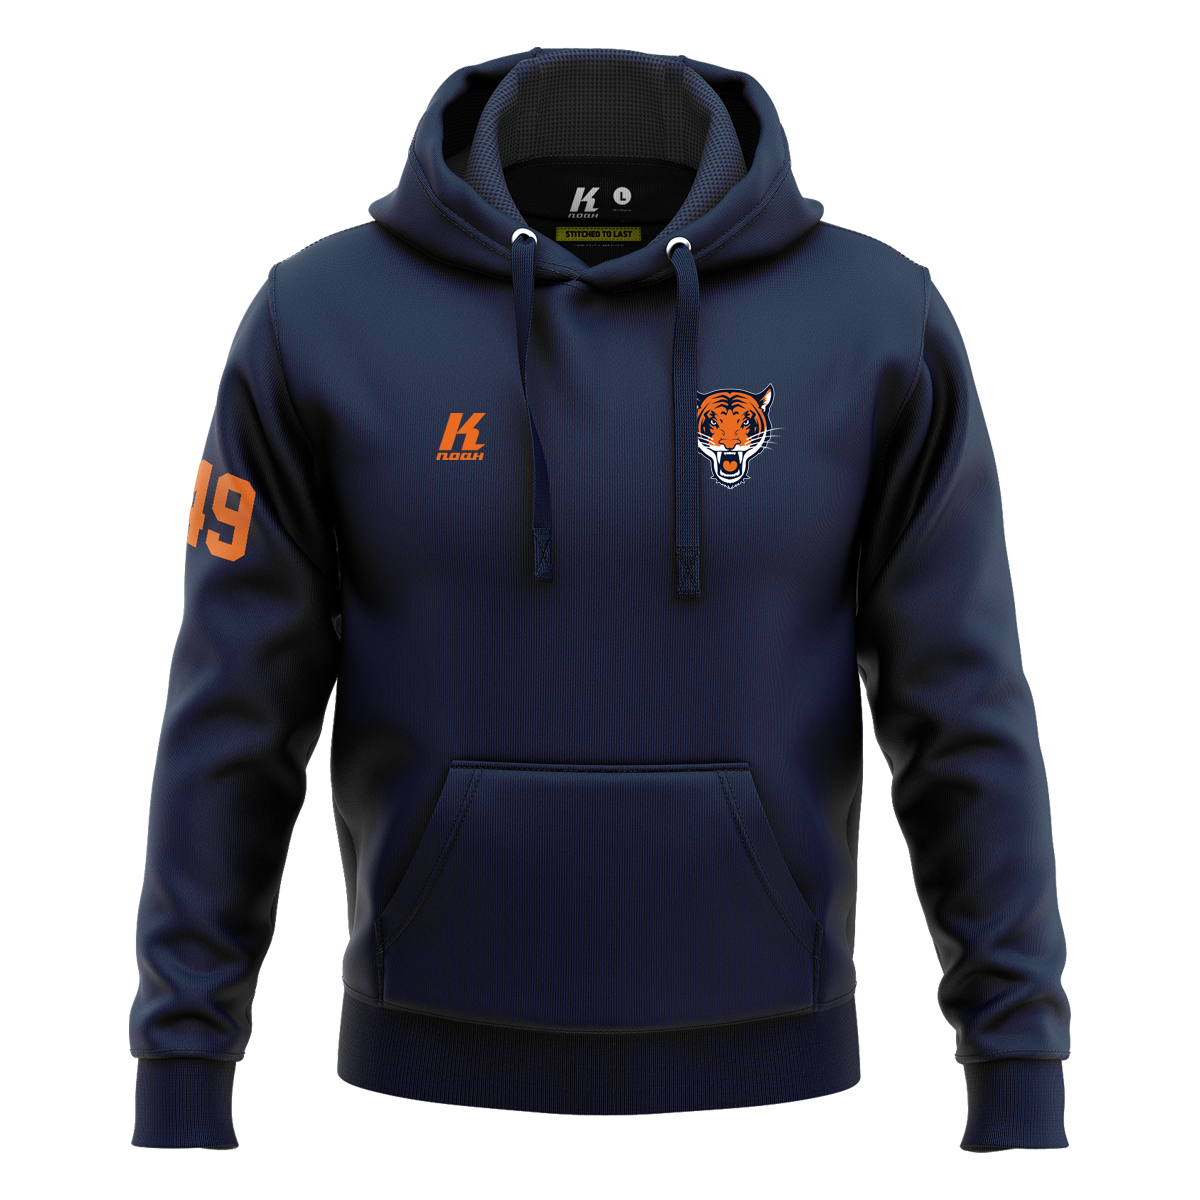 Tigers Basic Hoodie Primary with Playernumber/Initials